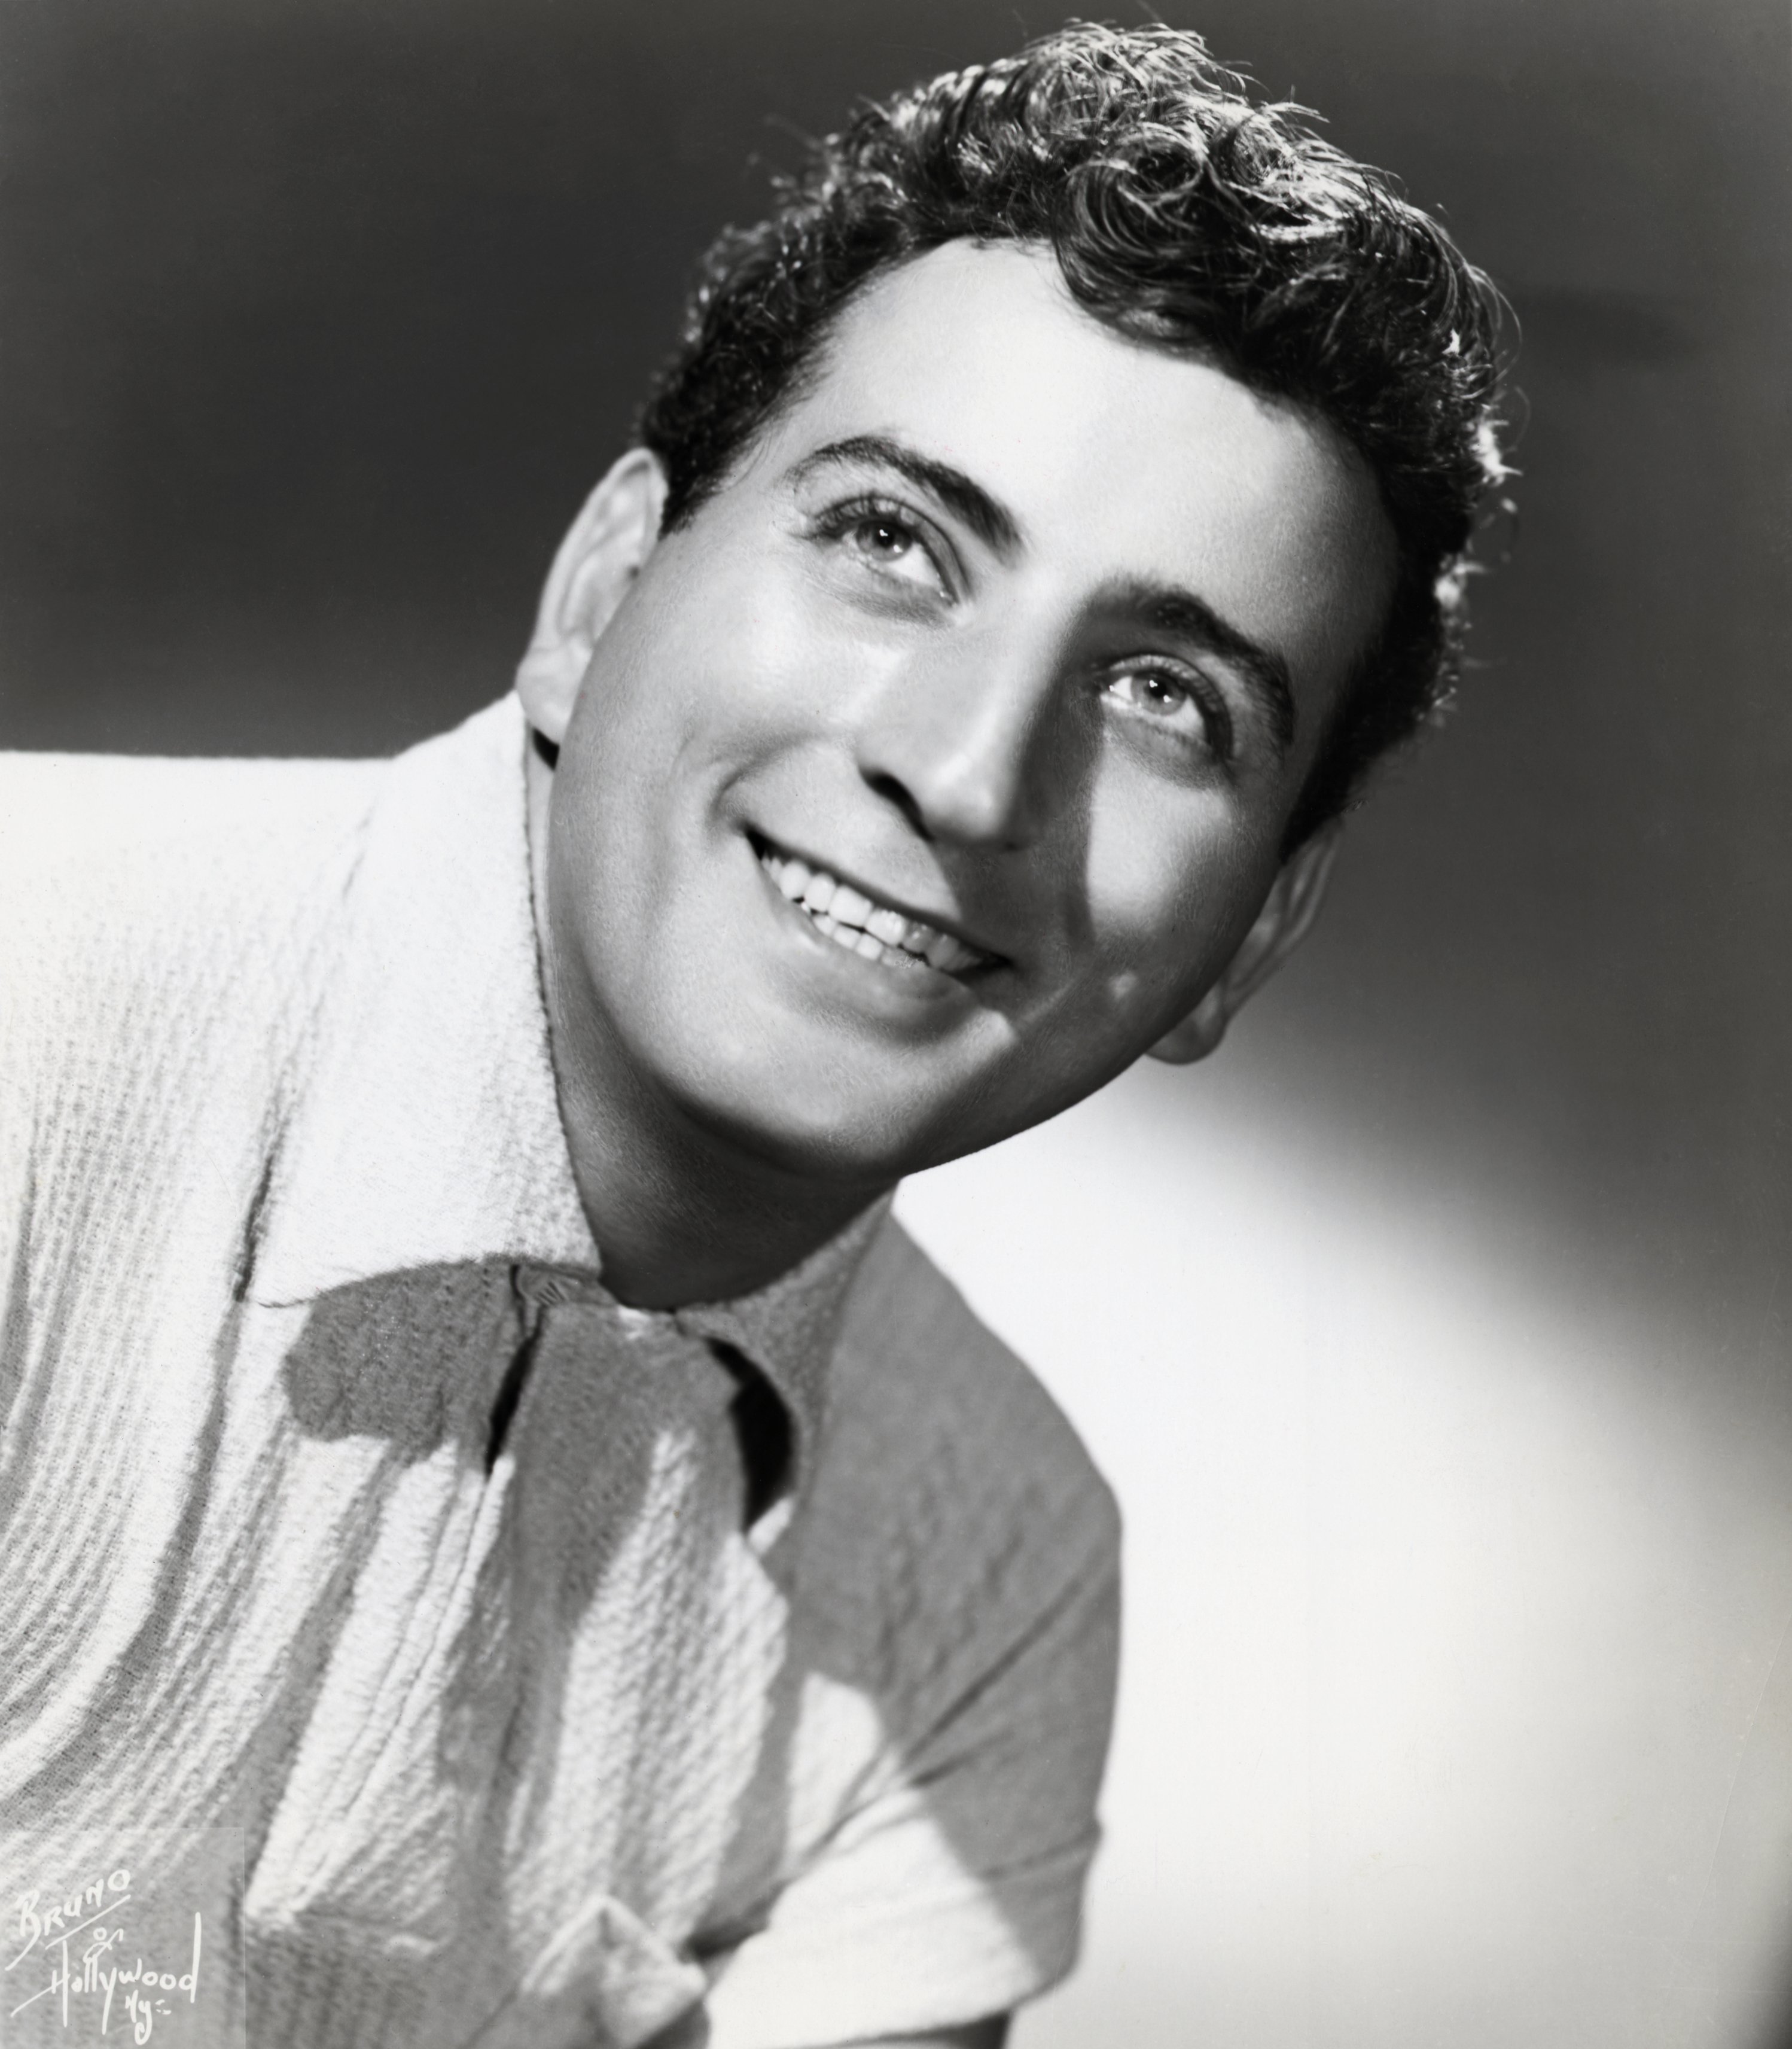 Tony Bennett as a teenager. | Source: Getty Images